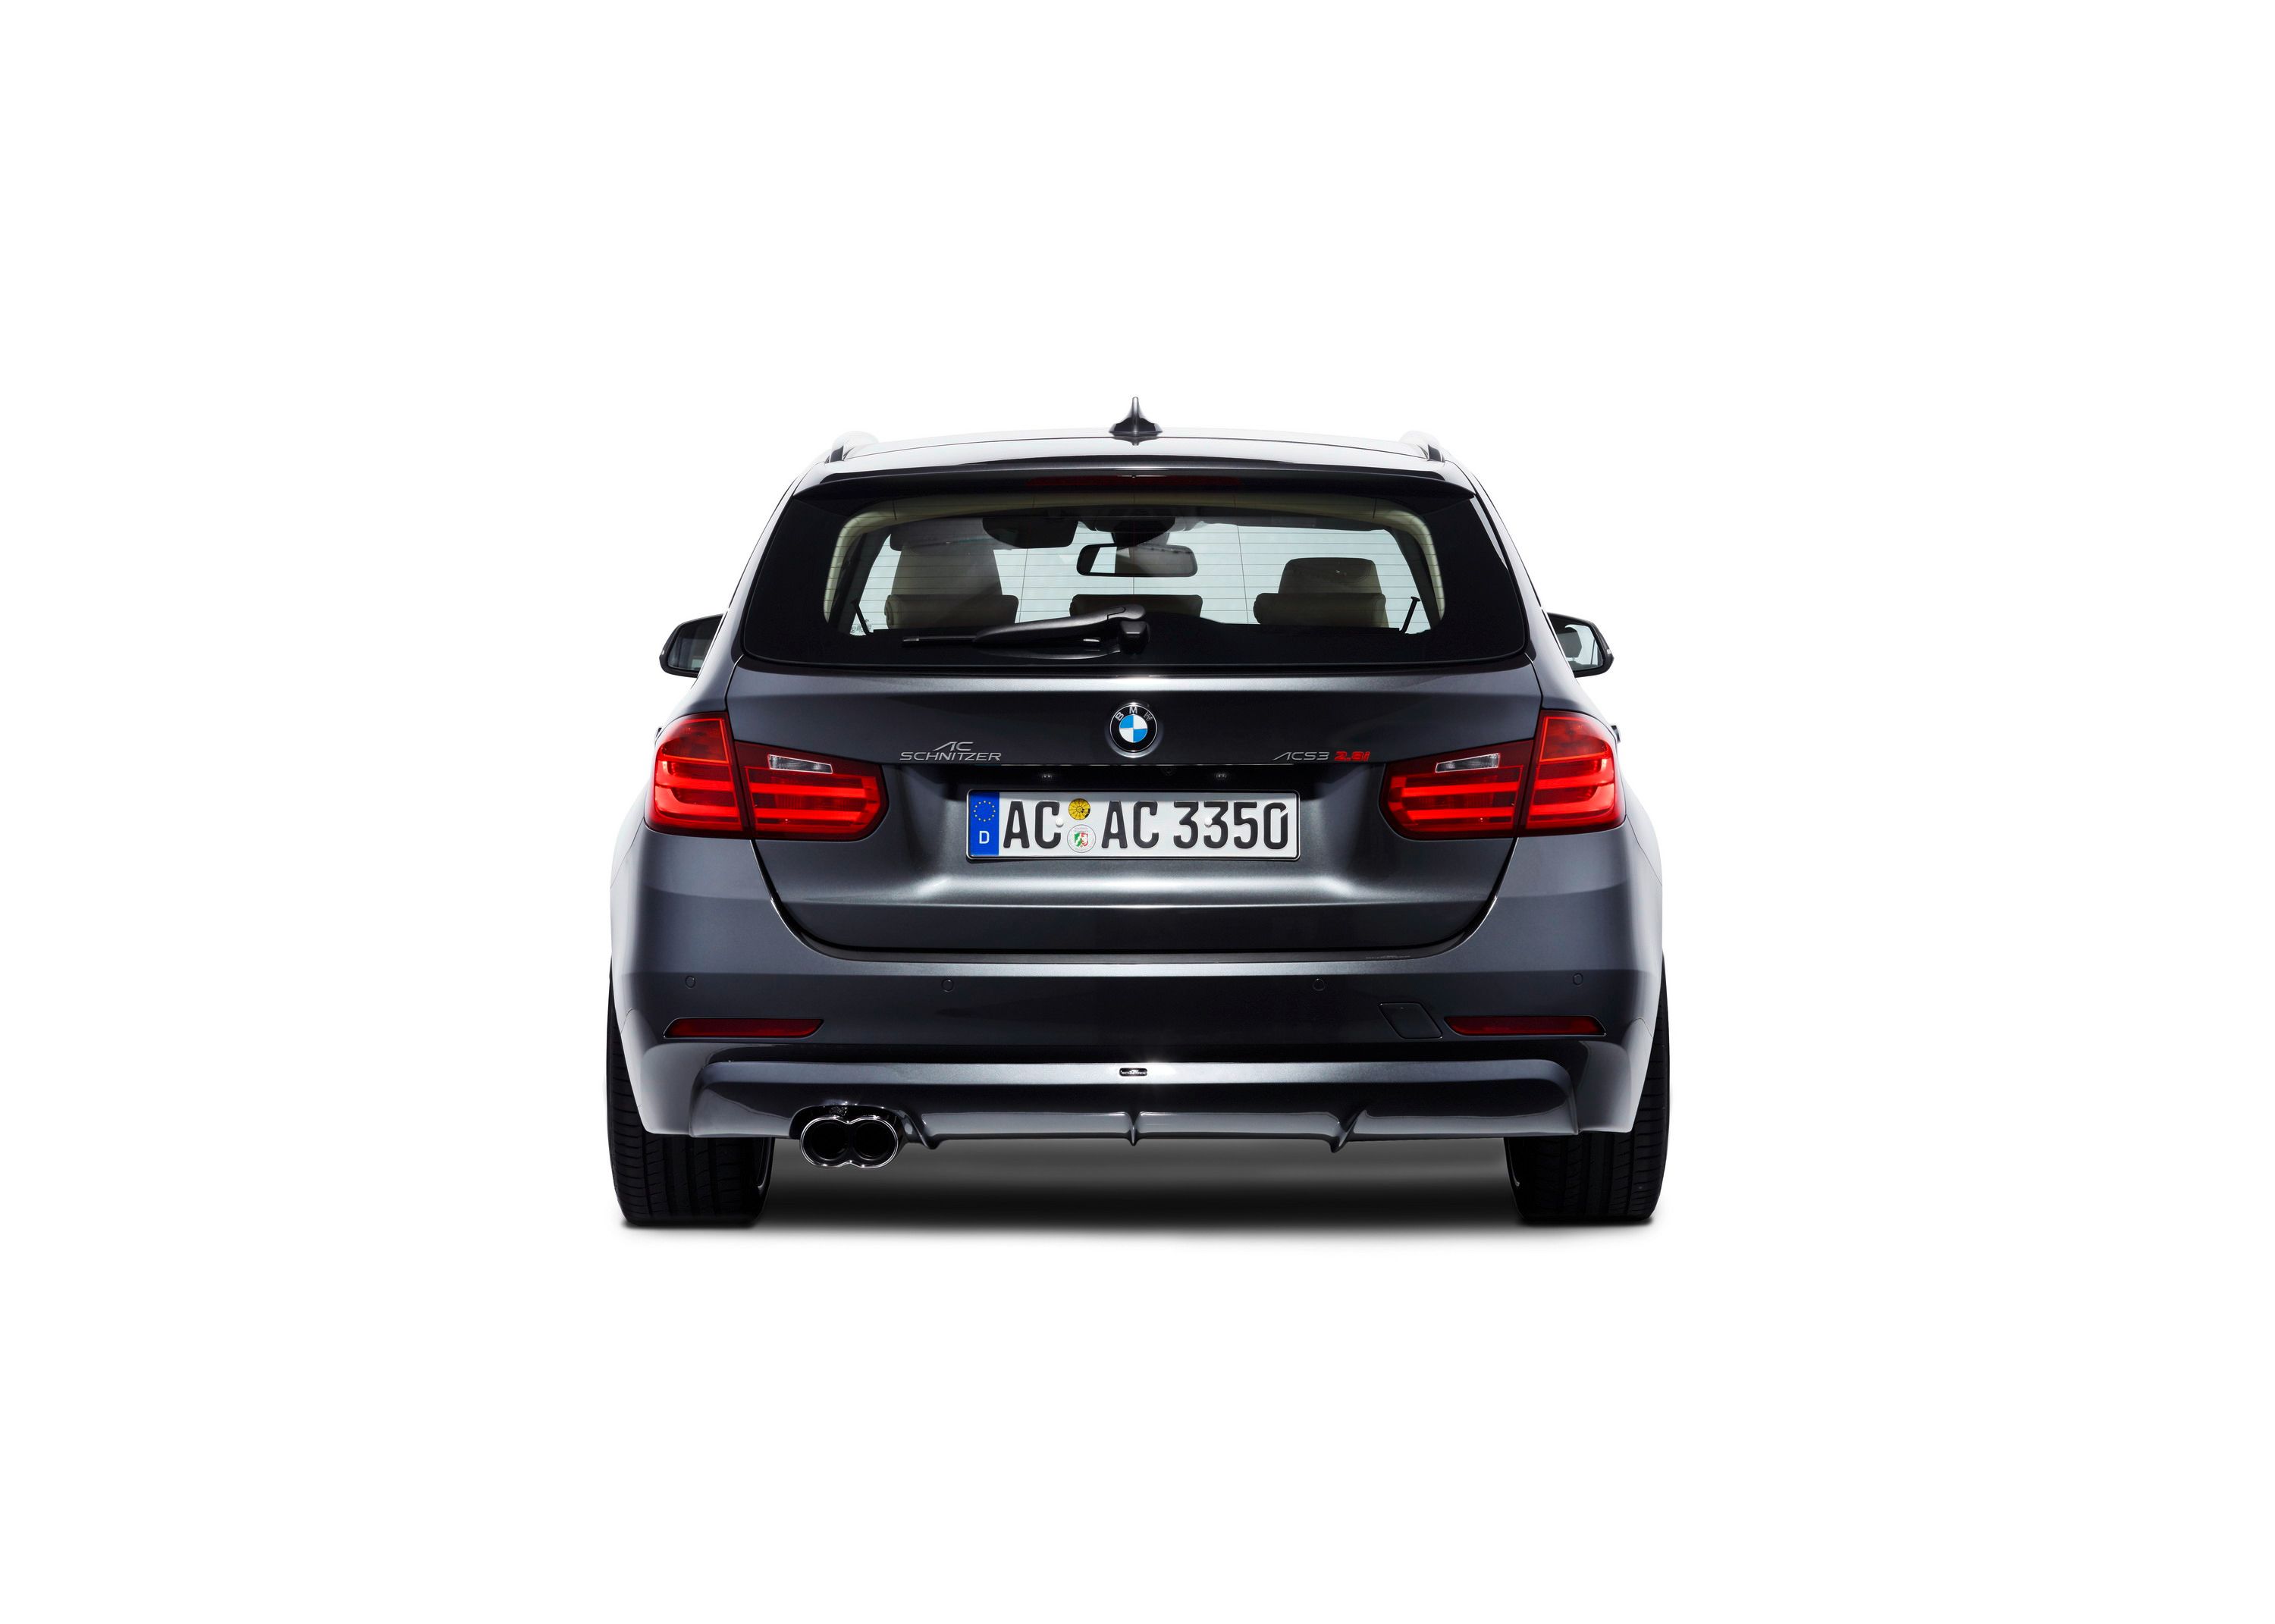 2013 BMW 3-Series Touring by AC Schnitzer